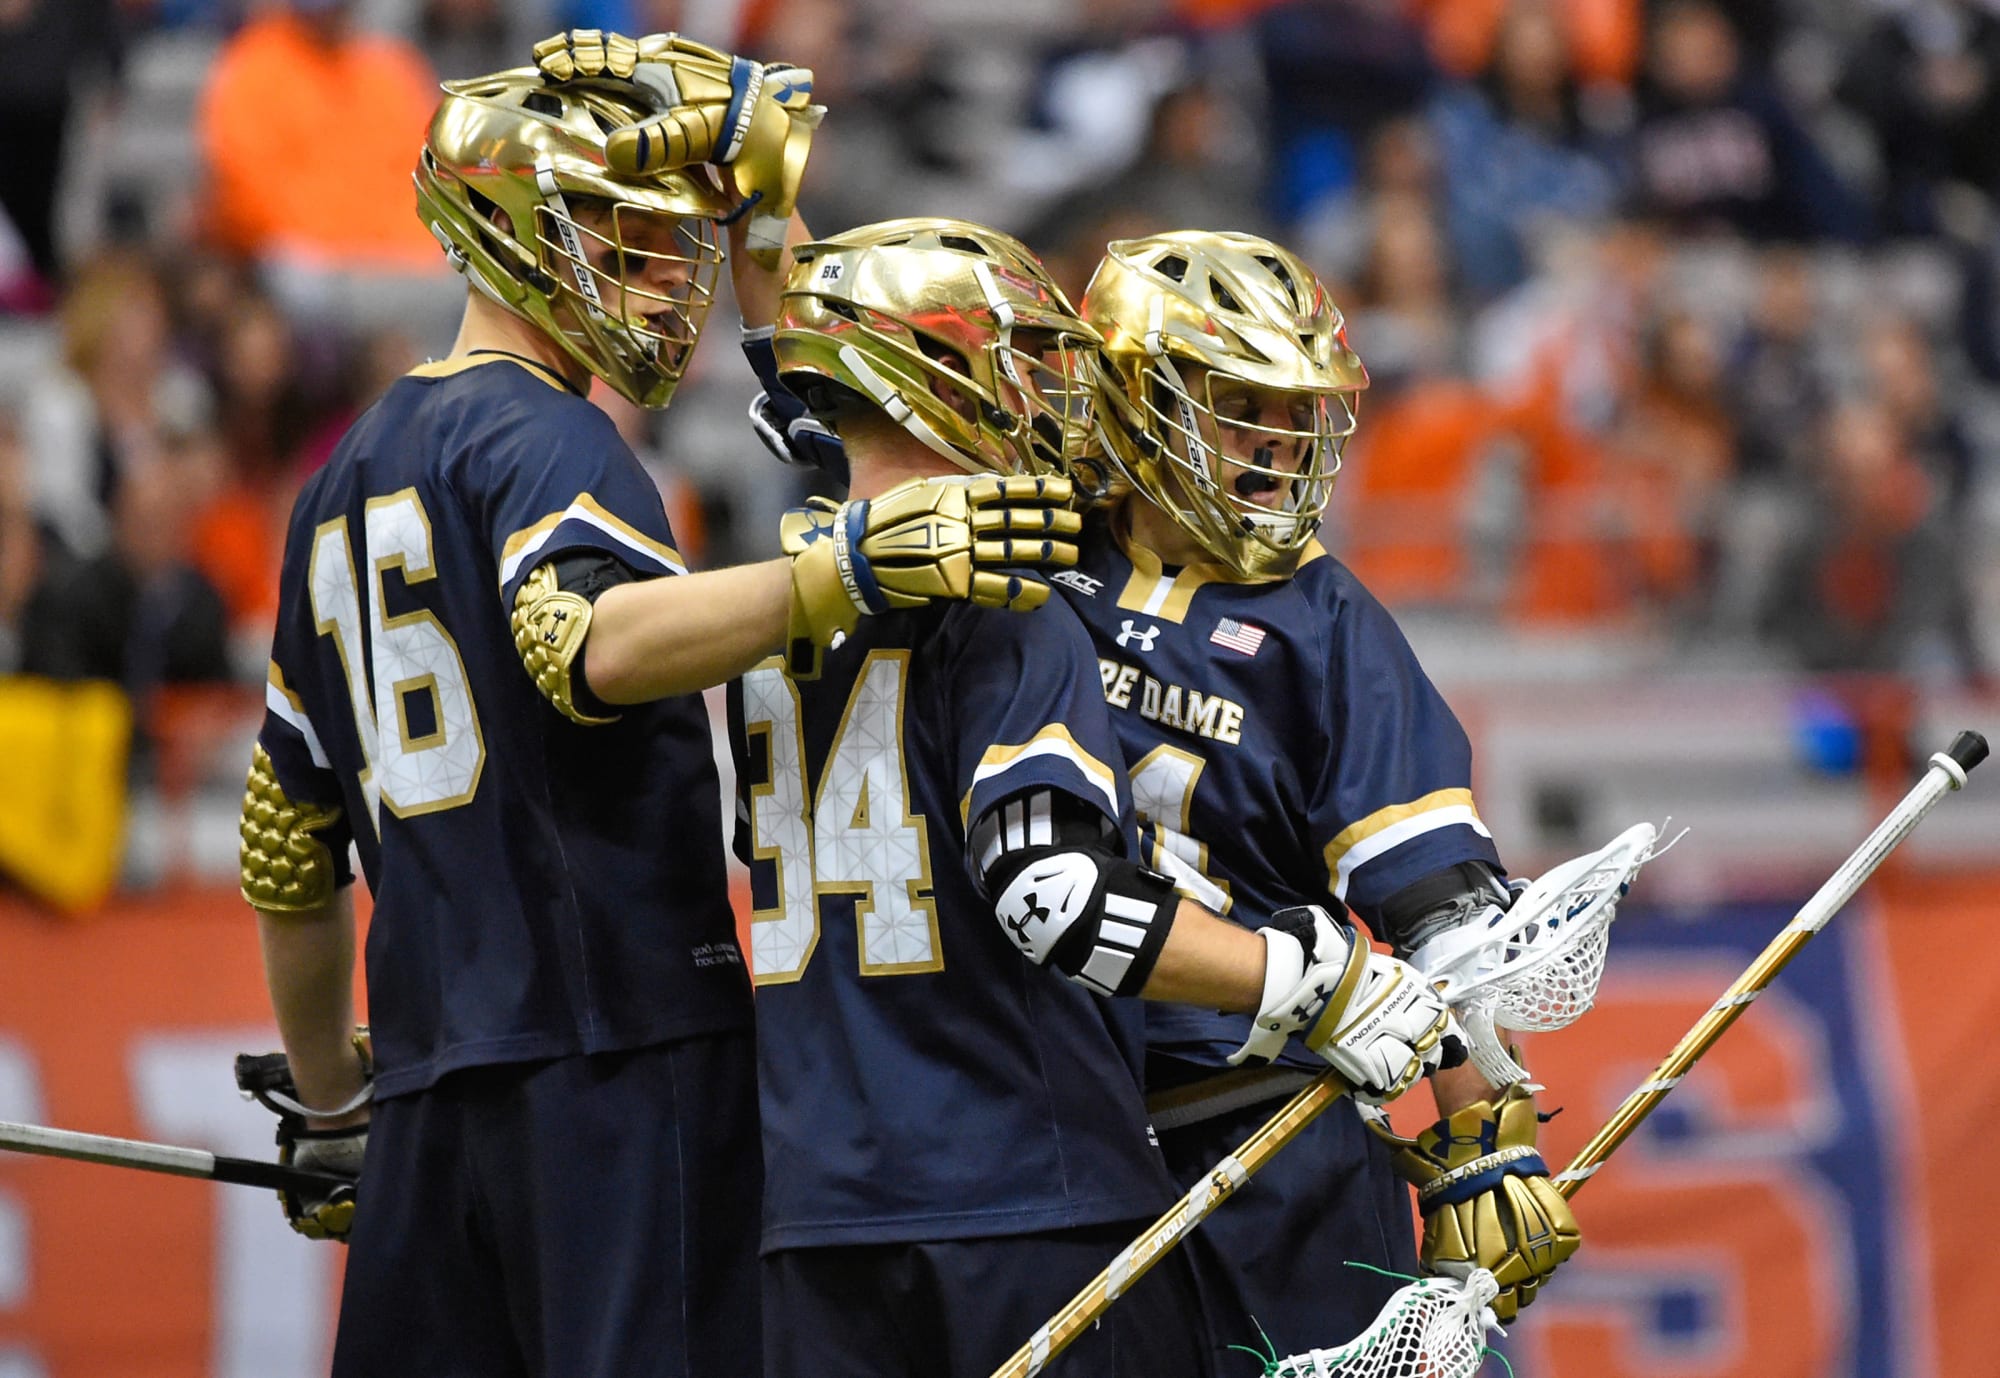 Notre Dame lacrosse 5th ranked Irish lose to 7th ranked Maryland